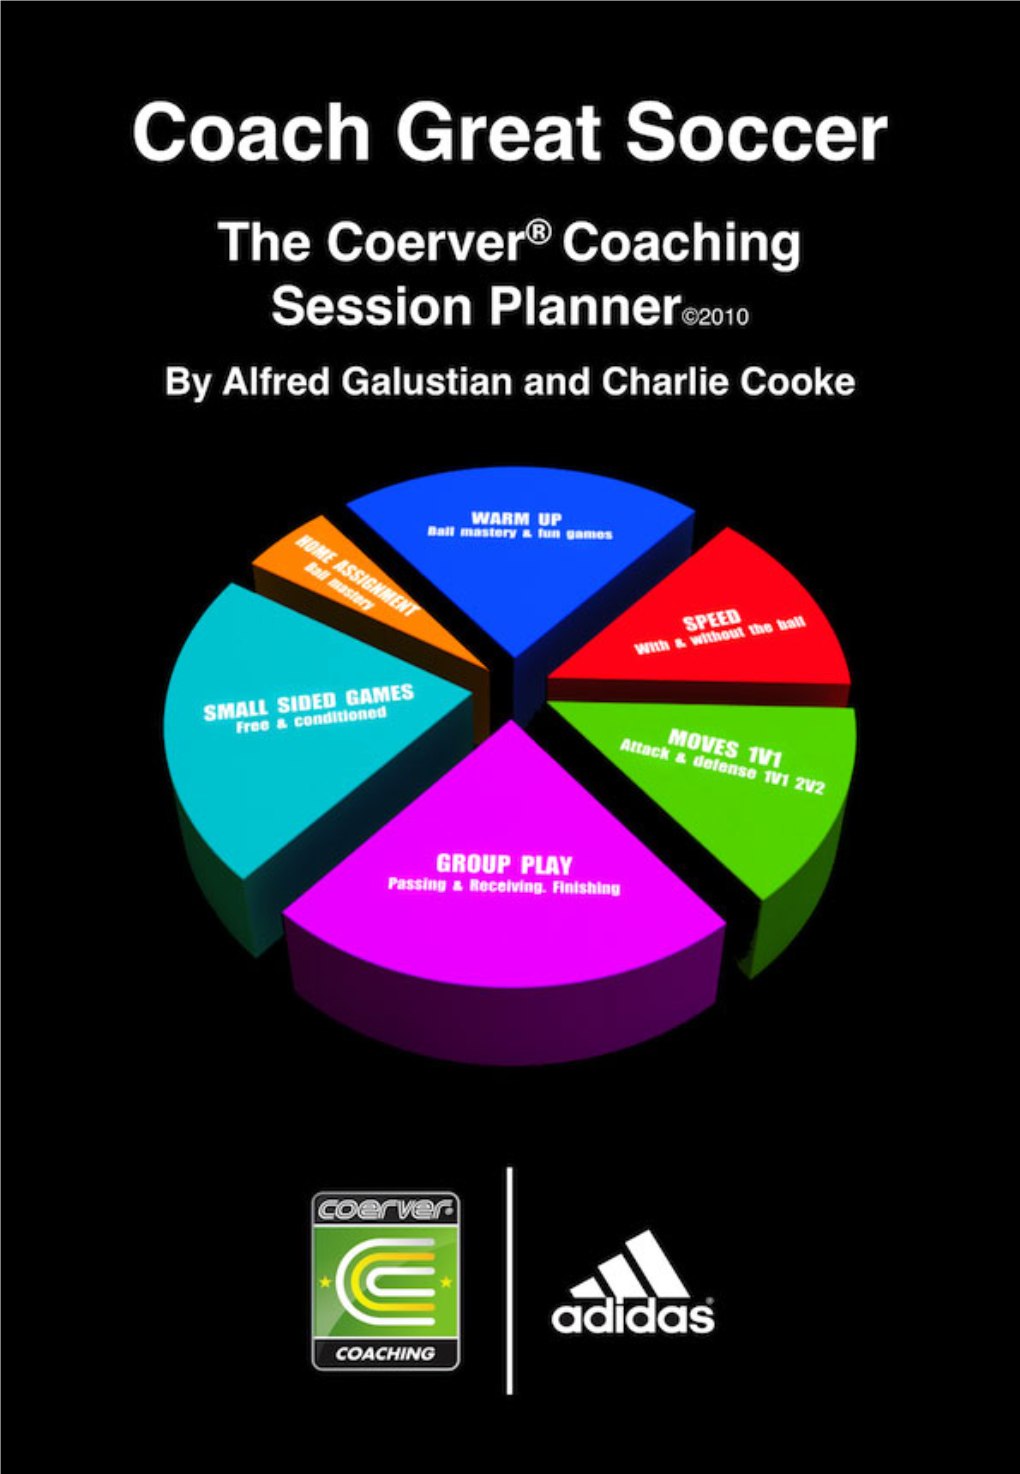 Coach Great Soccer � the Coerver Coaching Session Planner©2010